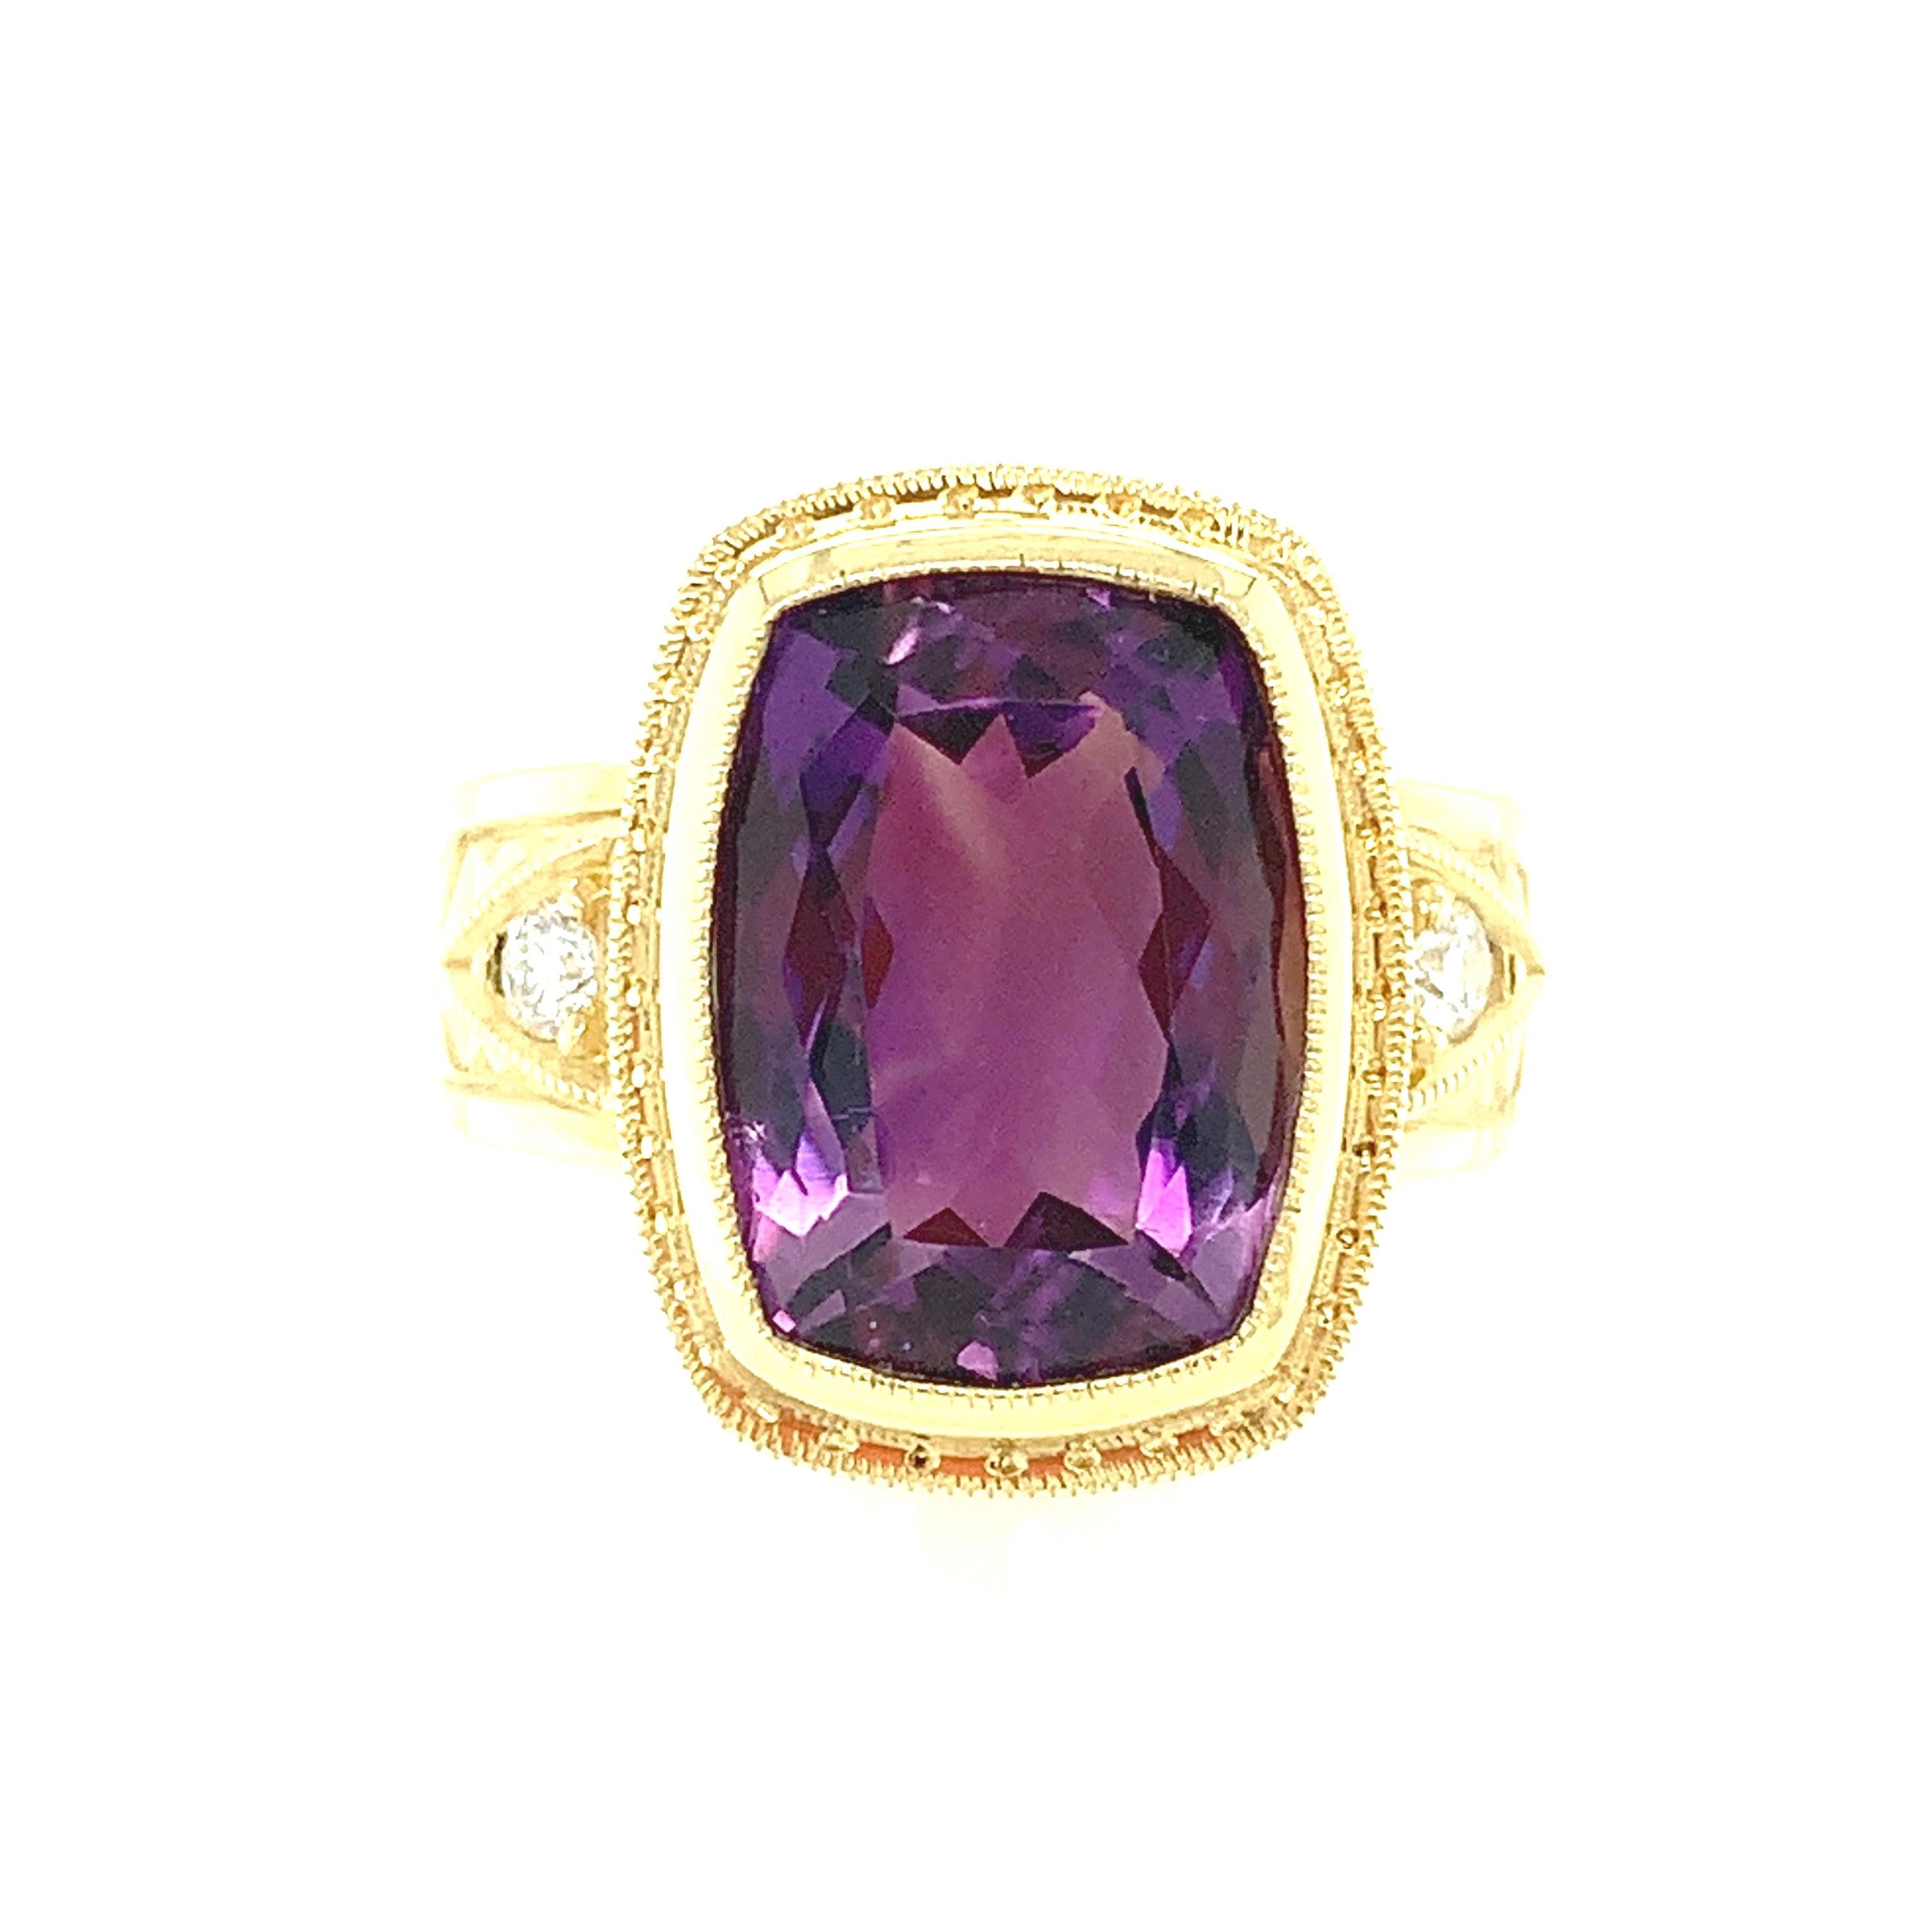 This handmade 18k yellow gold ring features a 5.57 carat cushion-cut amethyst with gorgeous crystalline transparency and beautiful rich color. Our signature ring was designed to showcase a single gorgeous gem by setting it in an intricately